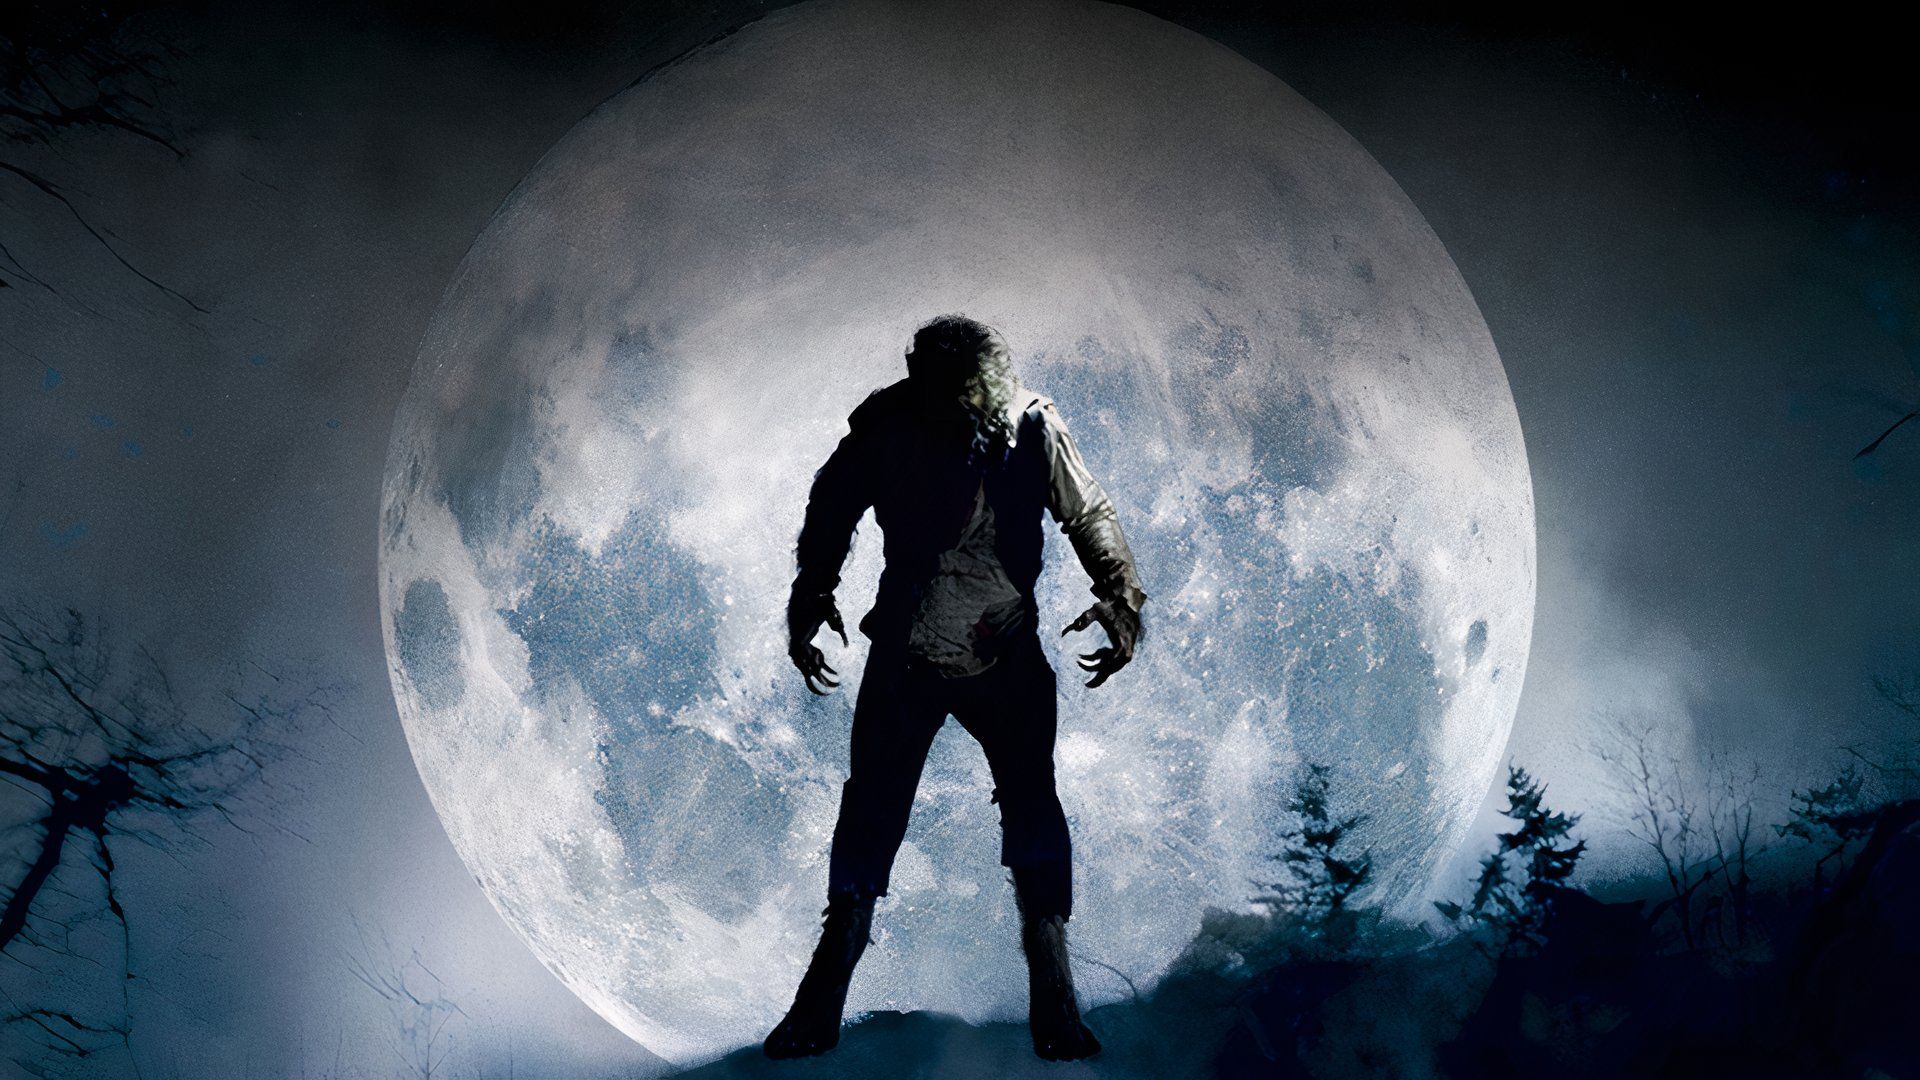 A werewolf standing in front of a full moon.